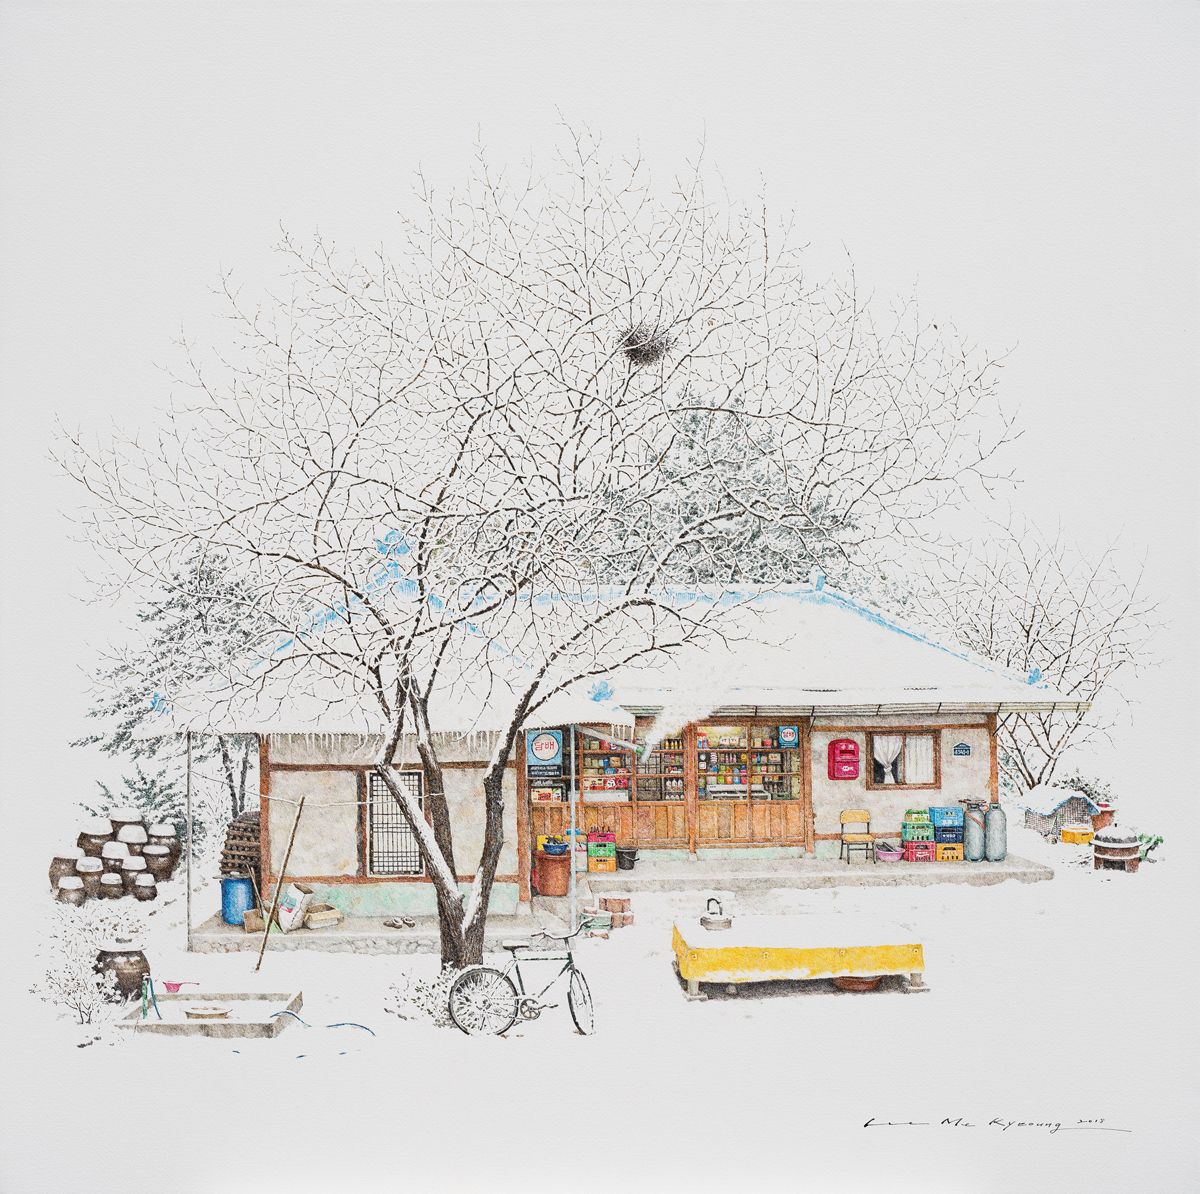 South Korean Convenience Store Drawings by Me Kyeoung Lee